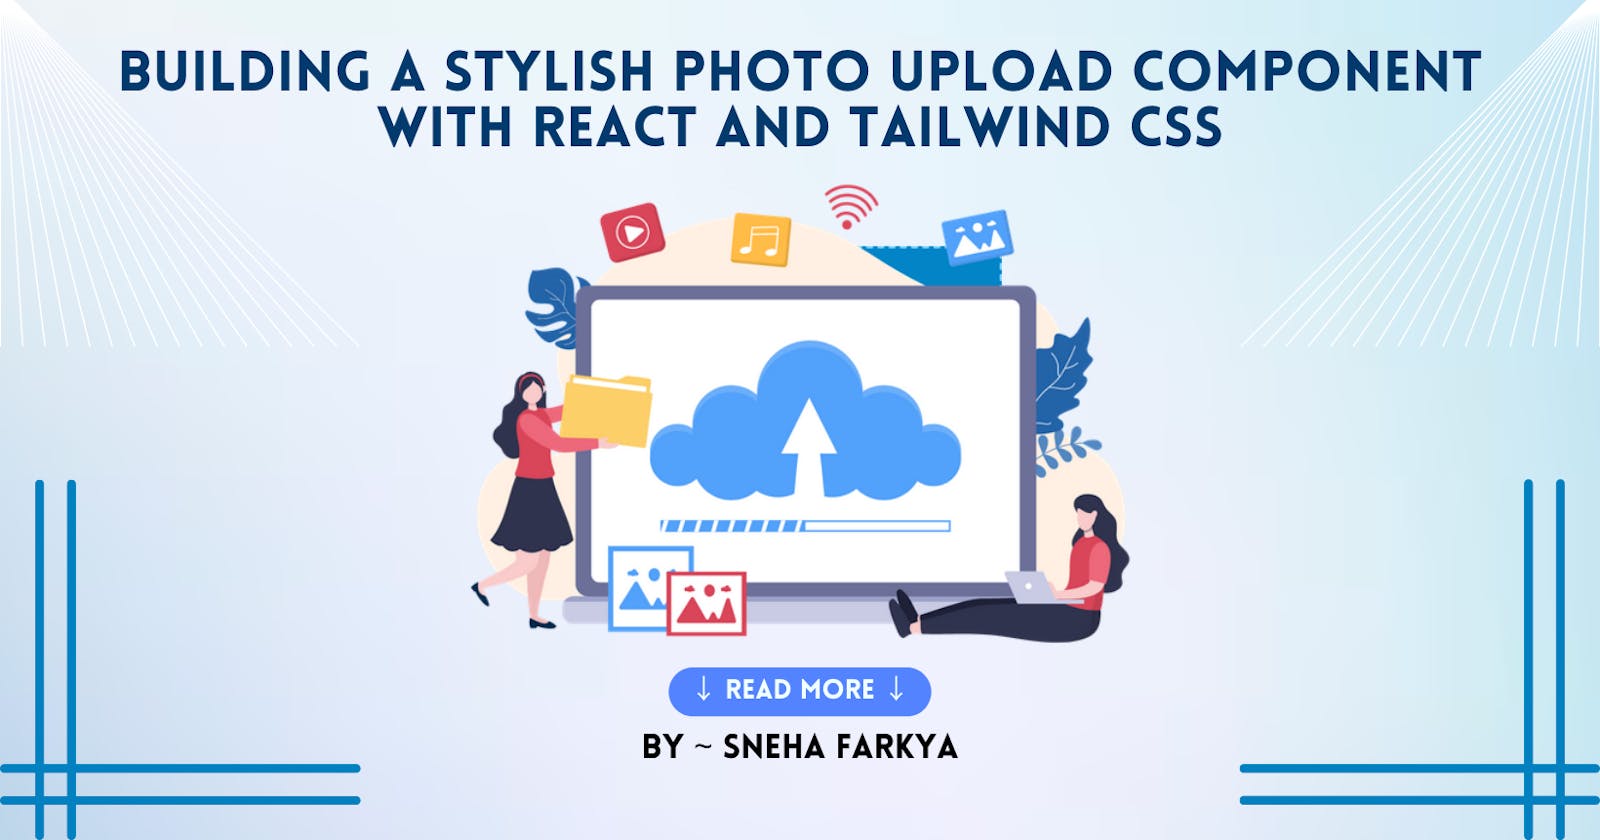 Building a Stylish Photo Upload Component with React and Tailwind CSS